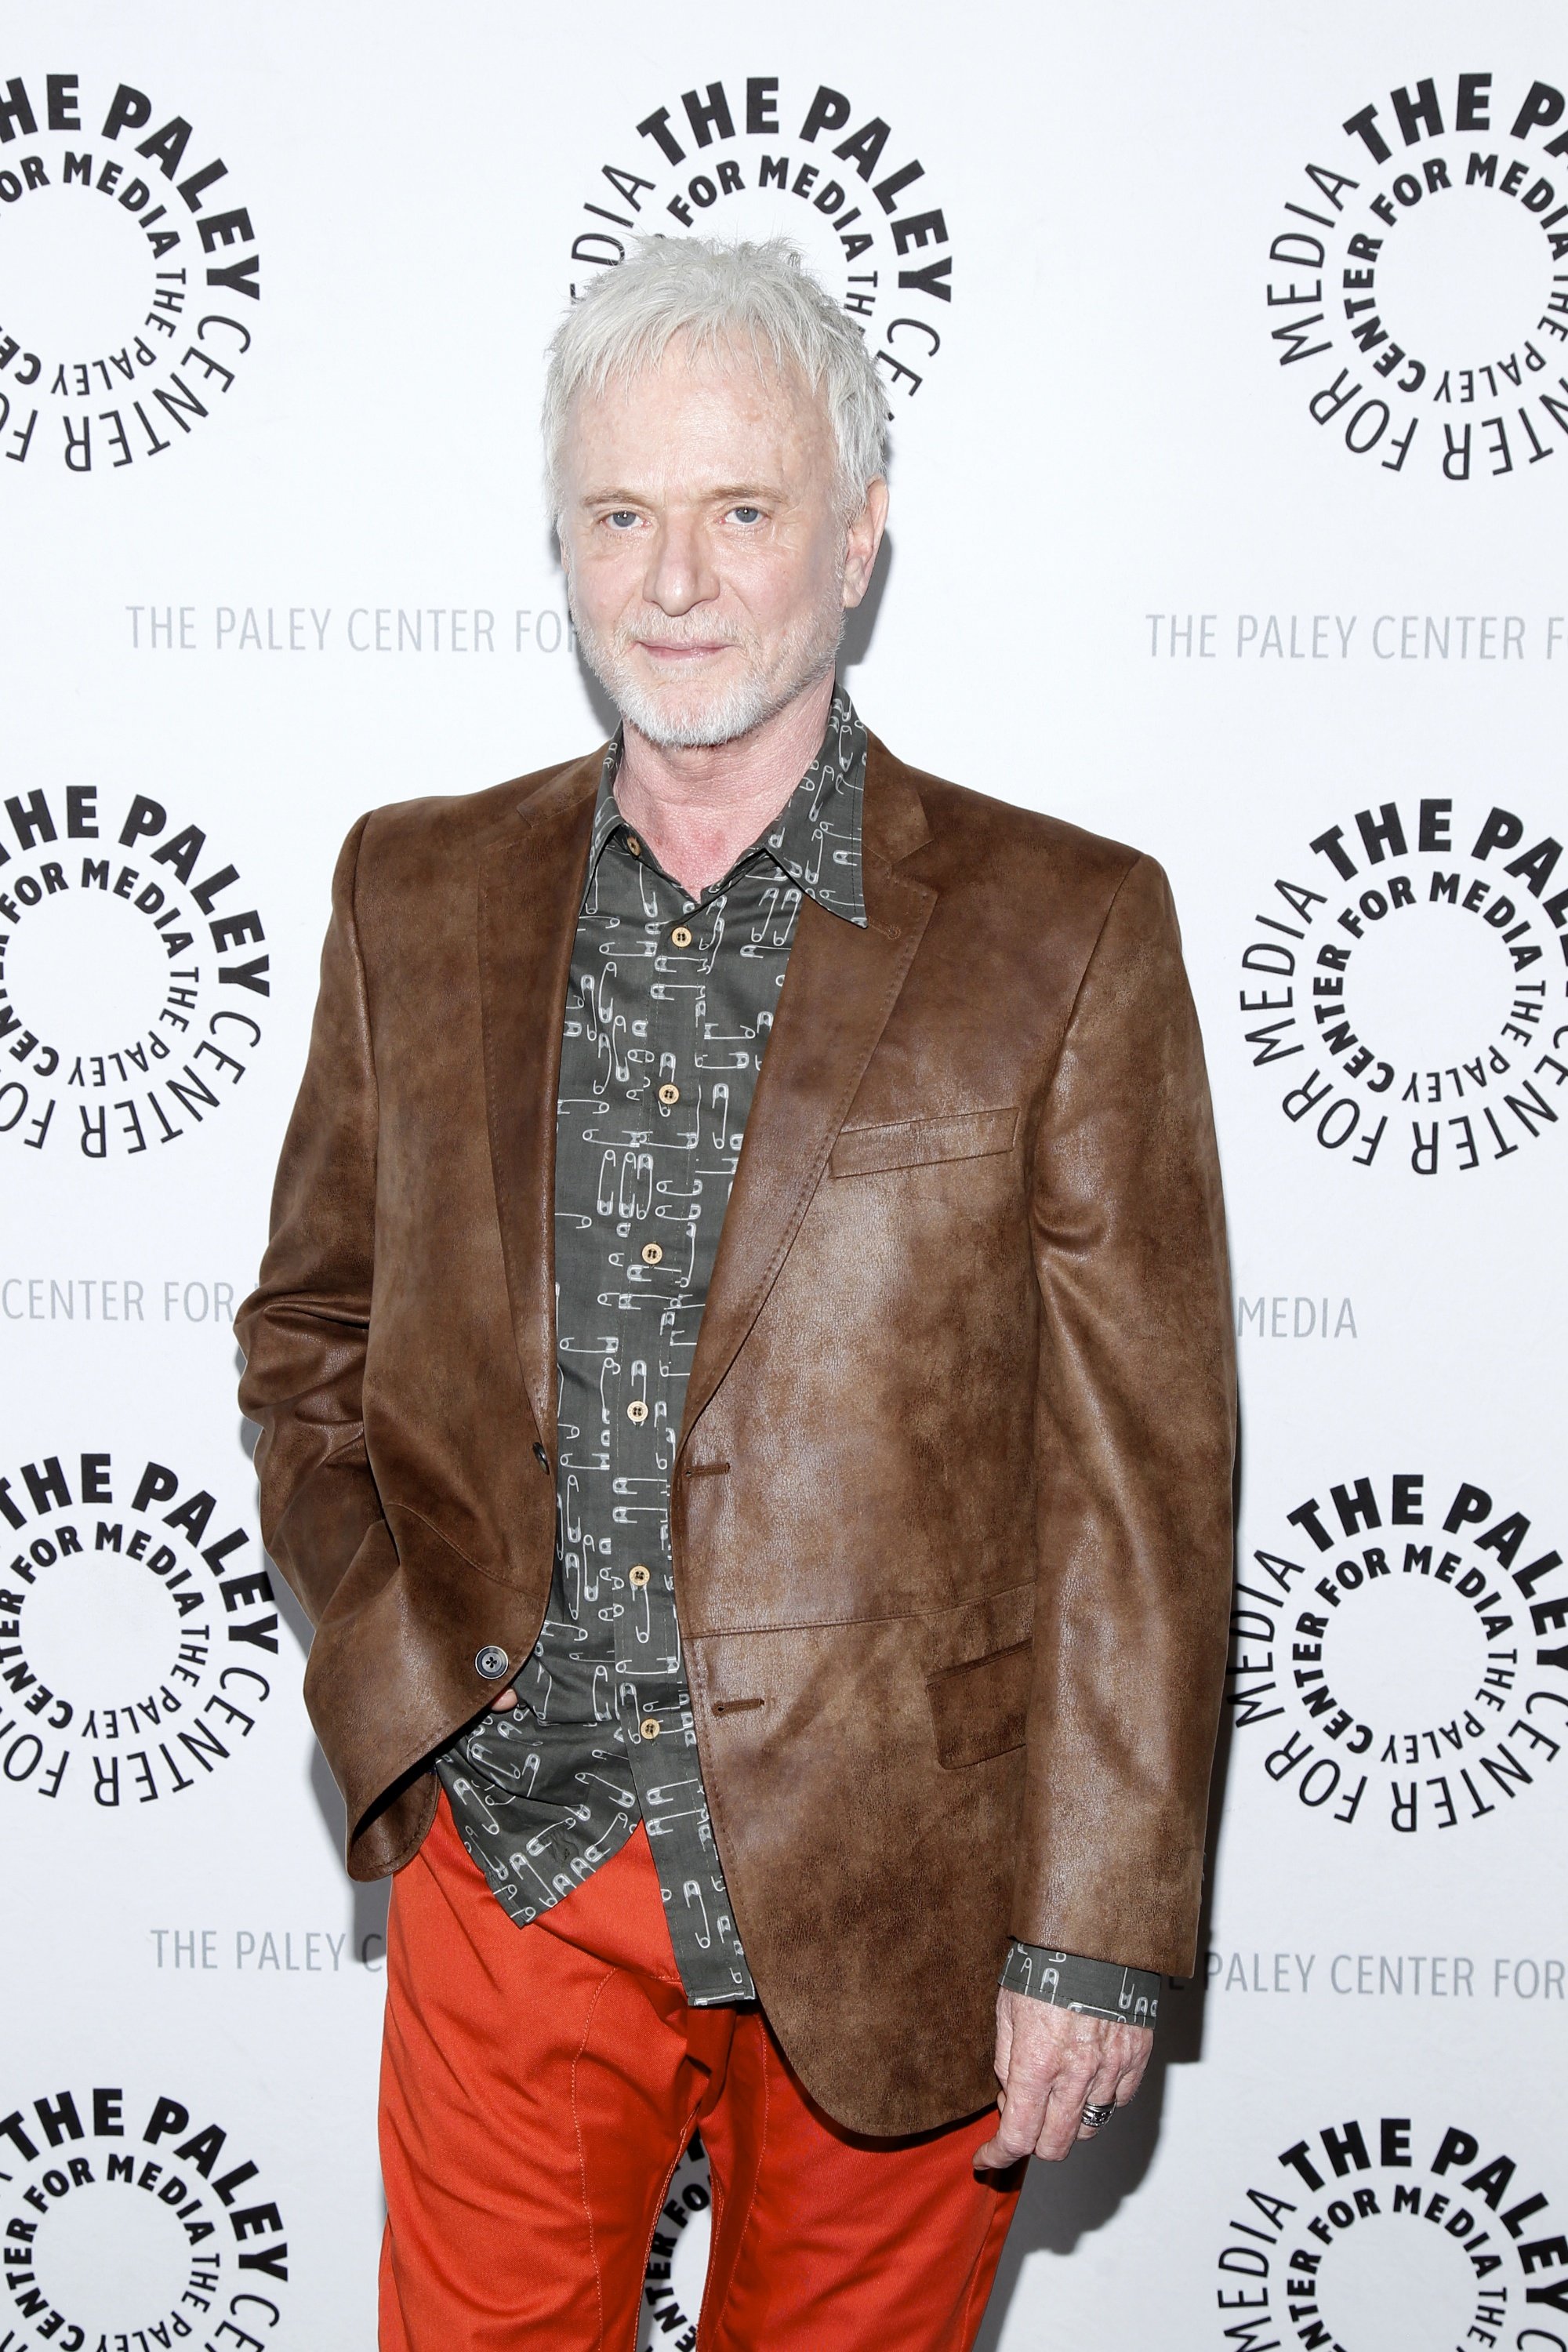 Actor Anthony Geary at "General Hospital celebrating 50 years and looking forward" at The Paley Center for Media on April 12, 2013 in Beverly Hills, California. | Source: Getty Images